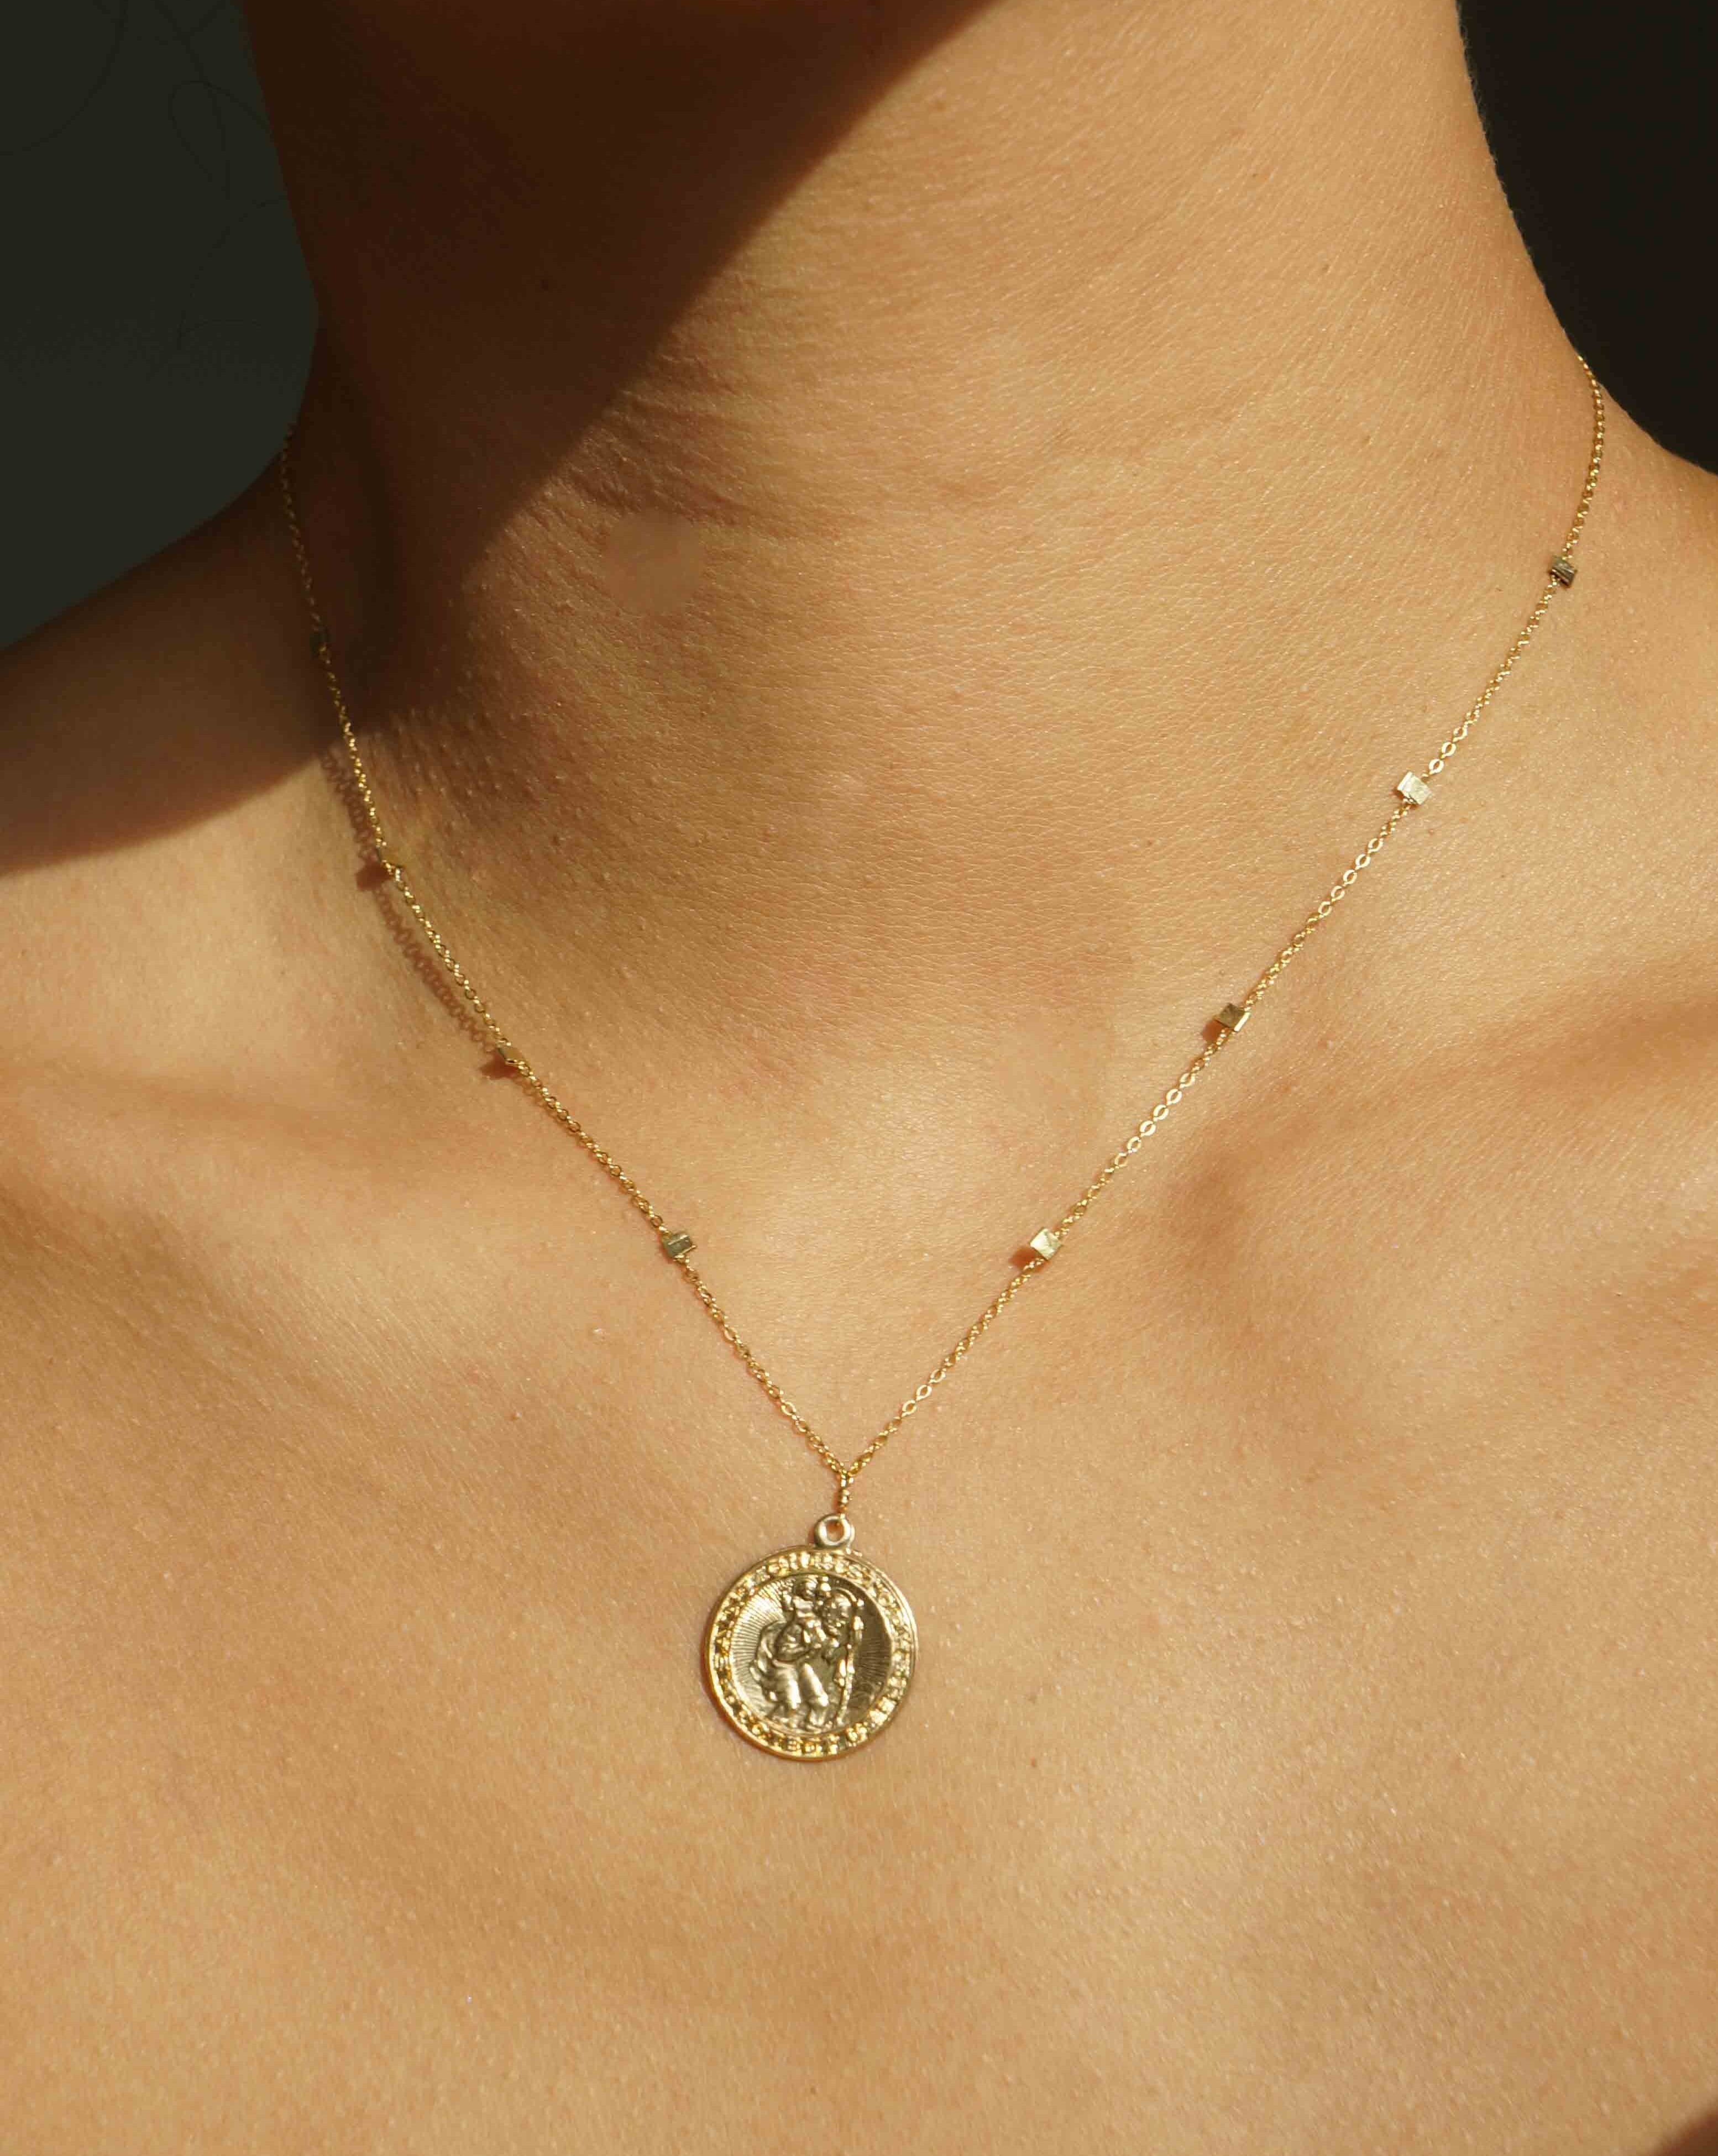 San Cris Necklace by KOZAKH. A 16 to 18 inch adjustable length necklace, crafted in 14K Gold Filled, featuring a 16mm Saint Christopher Medallion.